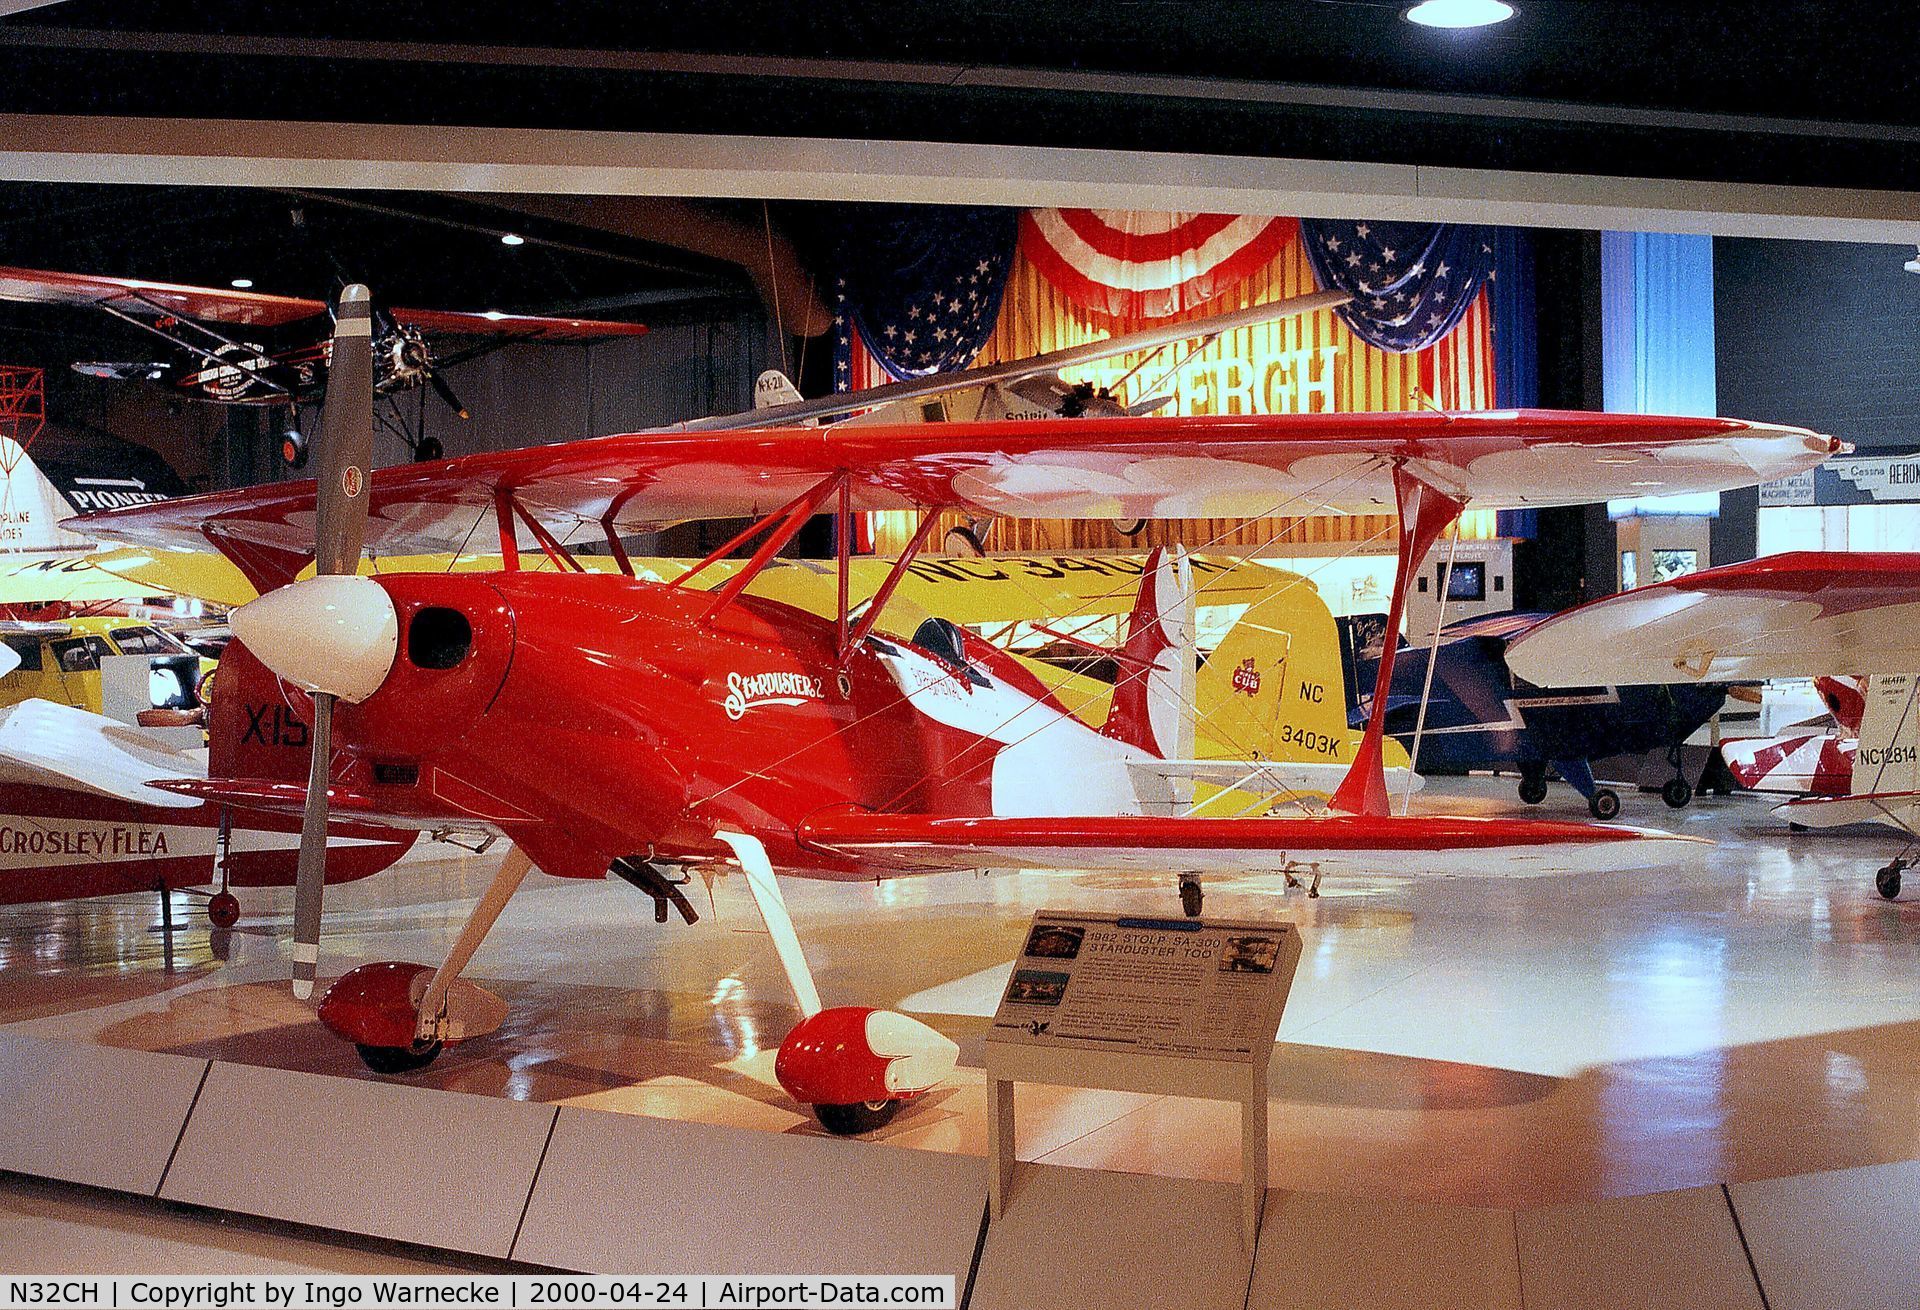 N32CH, 1981 Stolp SA-300 Starduster Too C/N 1961, Stolp (Henderson) Starduster 2 SA-300 at the EAA-Museum, Oshkosh WI